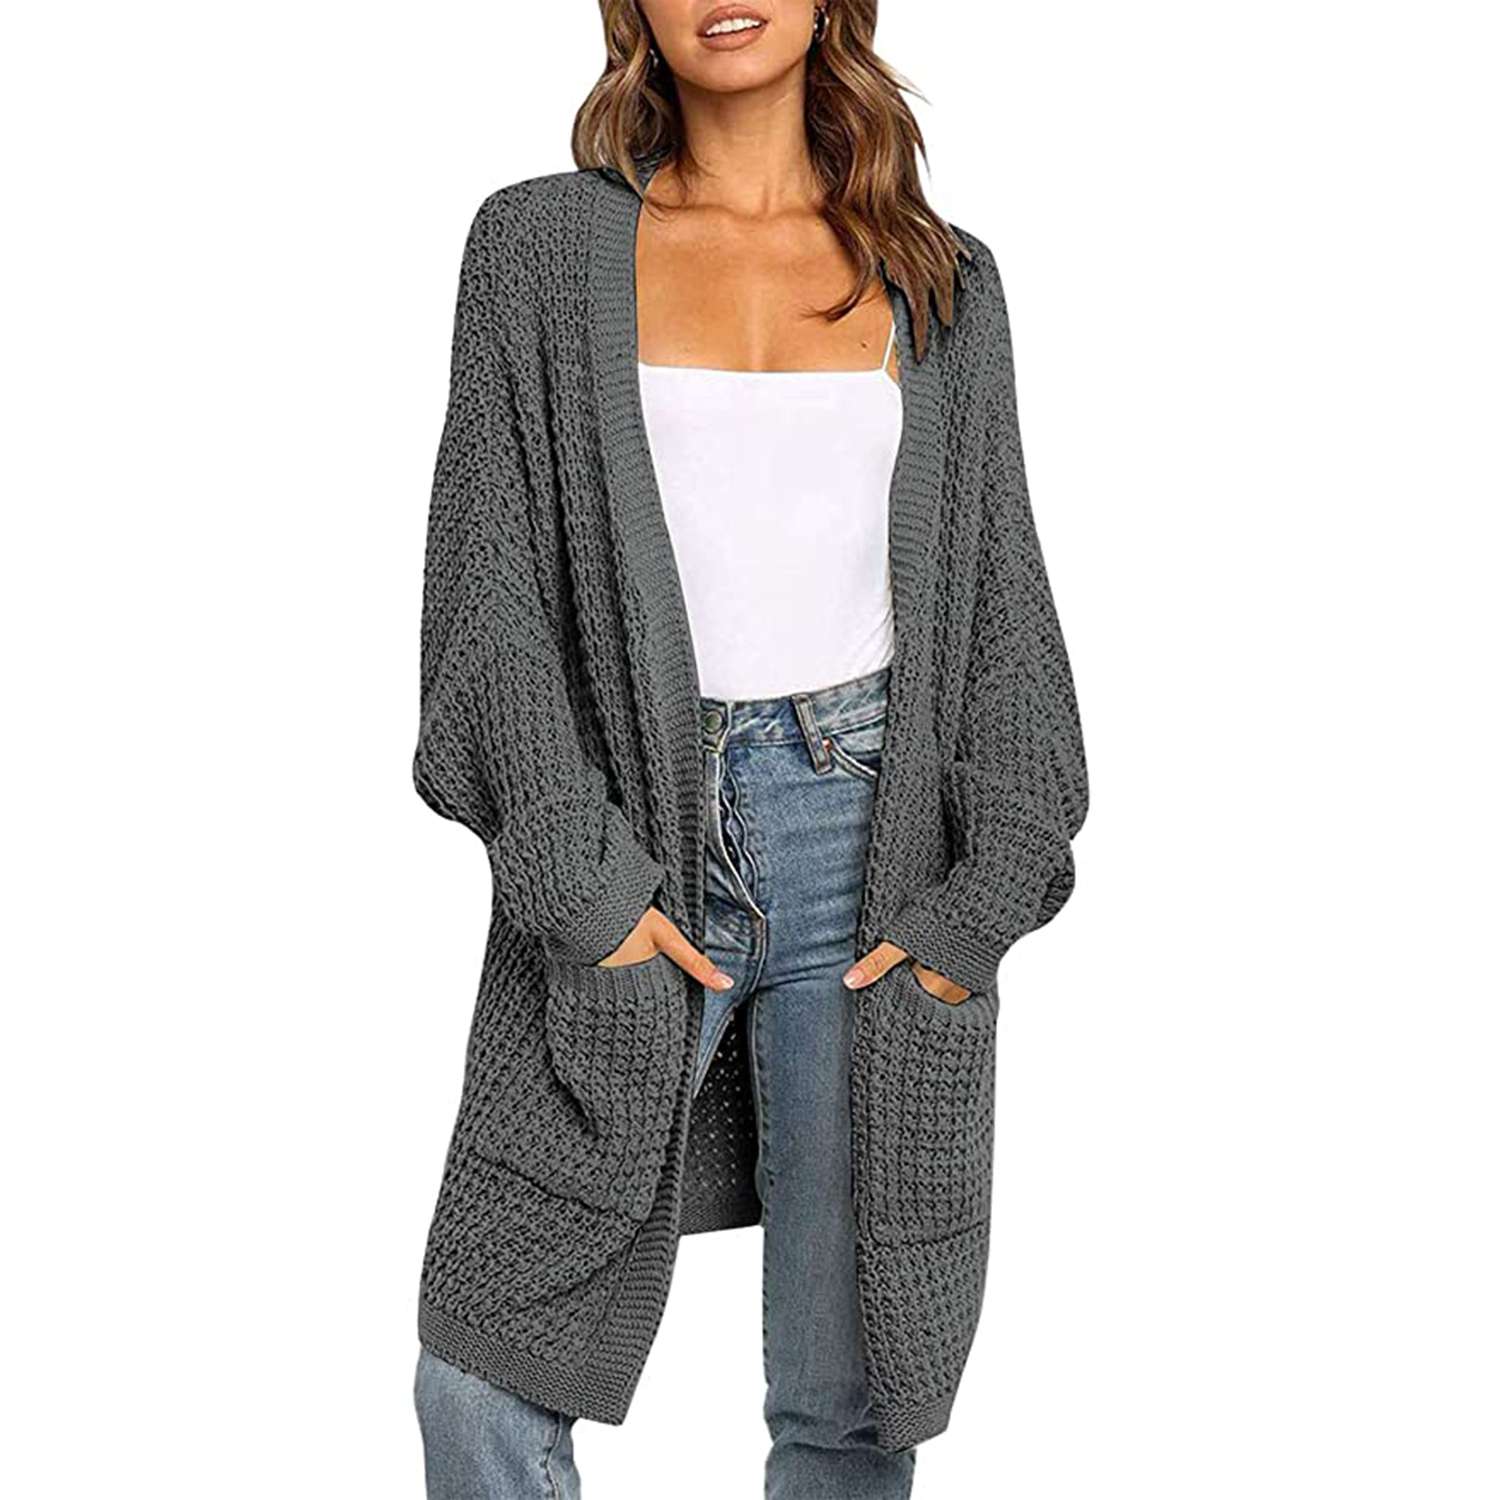 Women Sweaters,Sweaters Cardigan Oversized Fall Plus Size Tunic Long Cardigans Pullover Tops